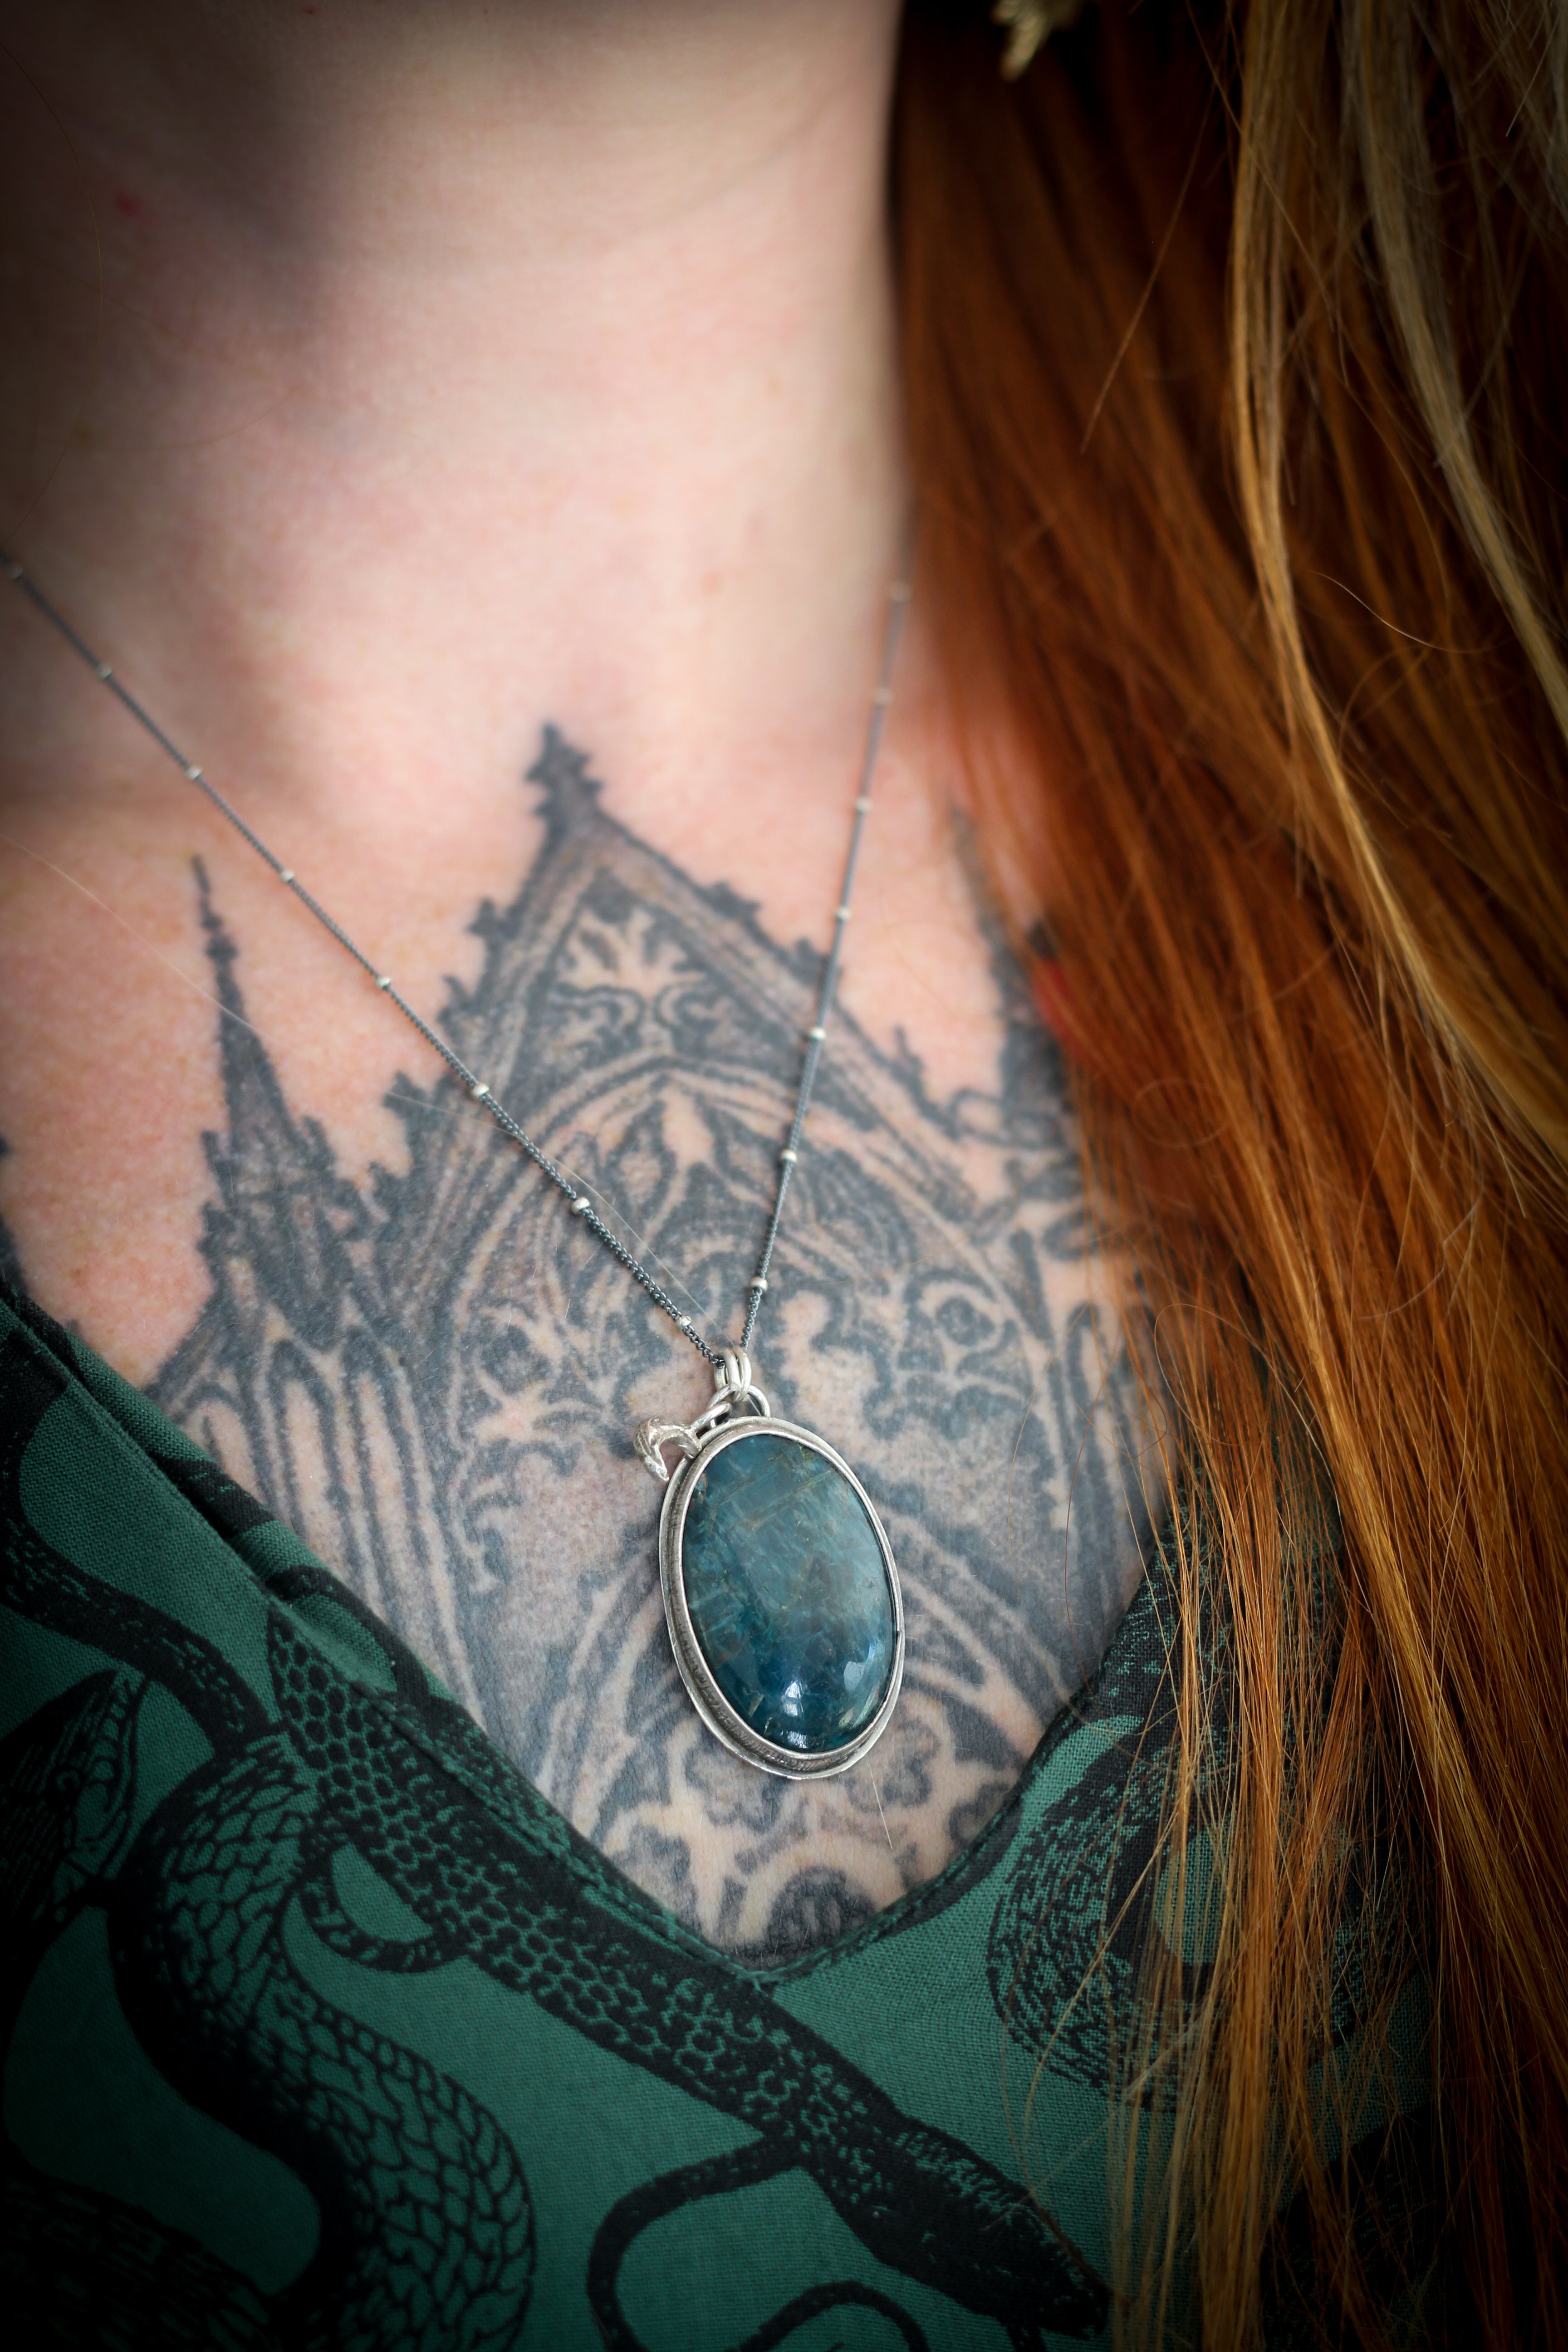 The Amulet of Pax - Neon apatite and silver necklace, forged moon, star on the back